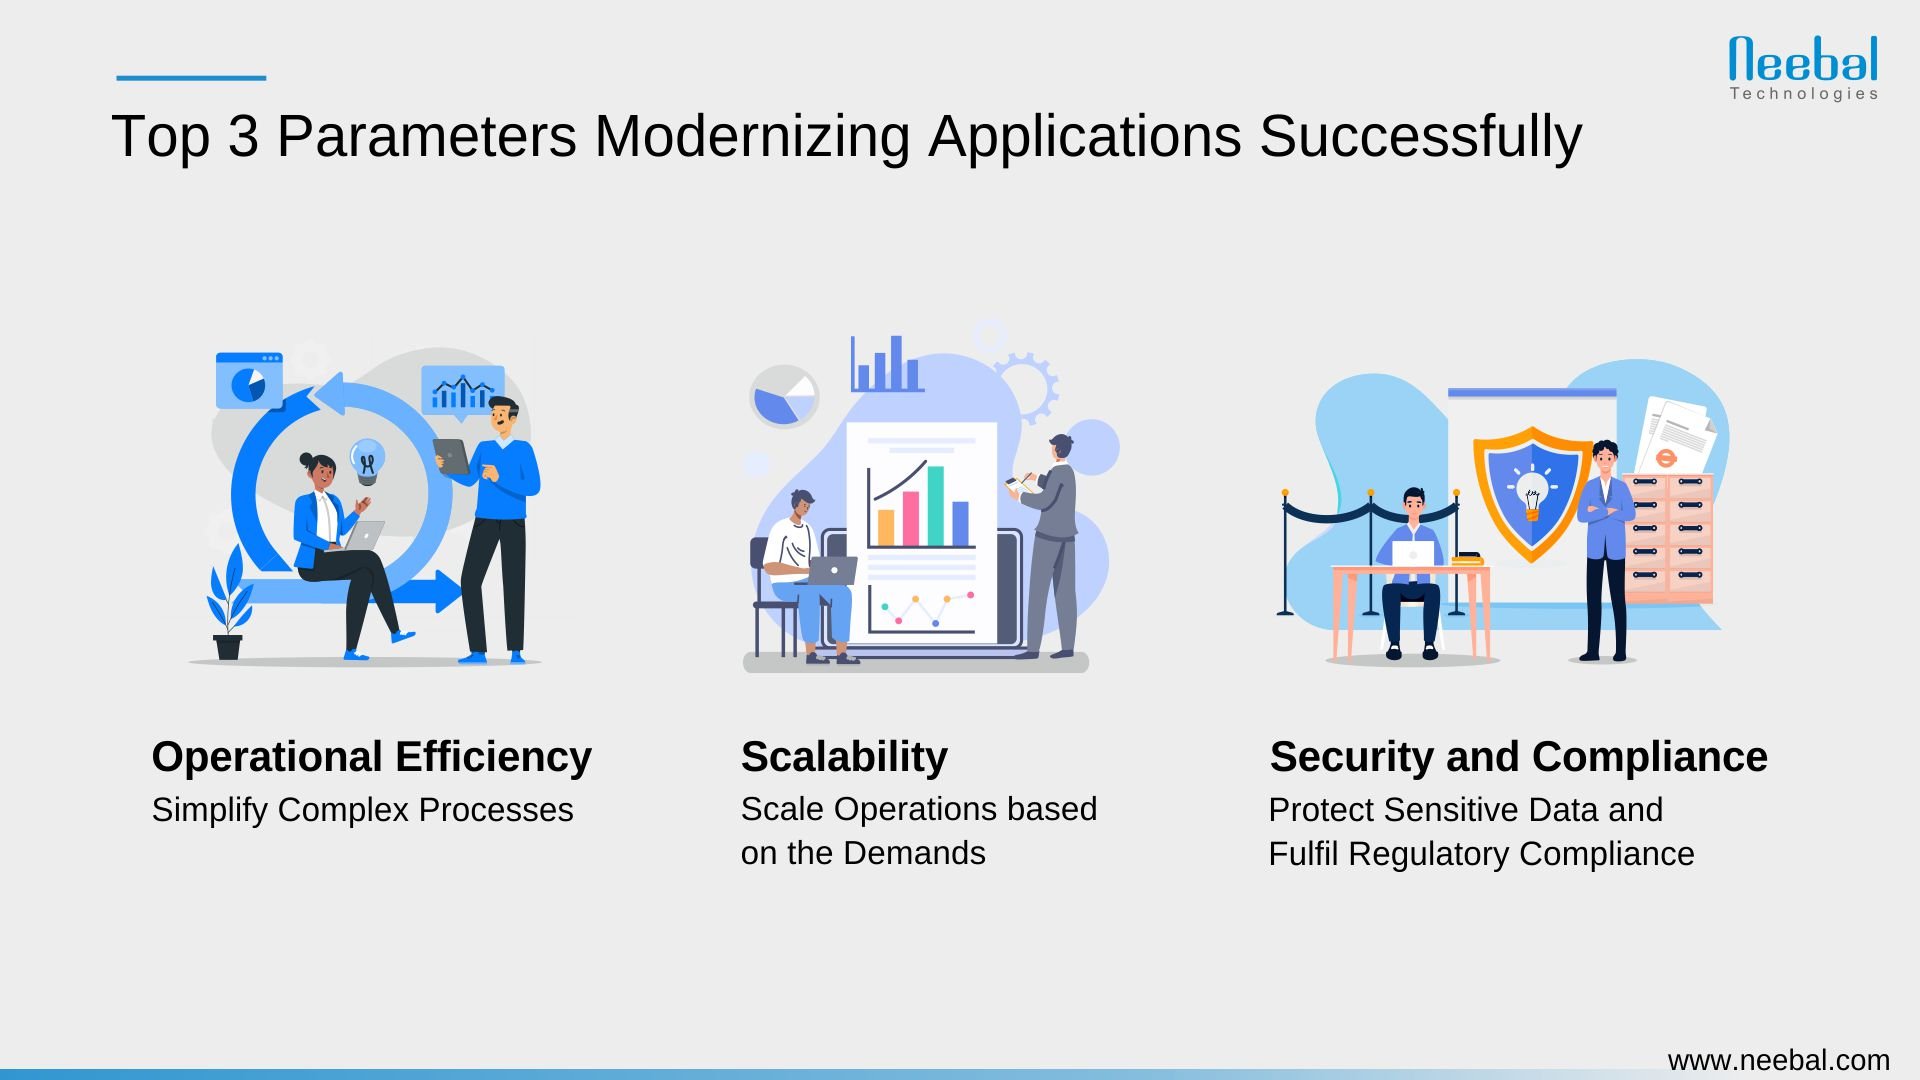 Top 3 Parameters Modernizing Applications Successfully